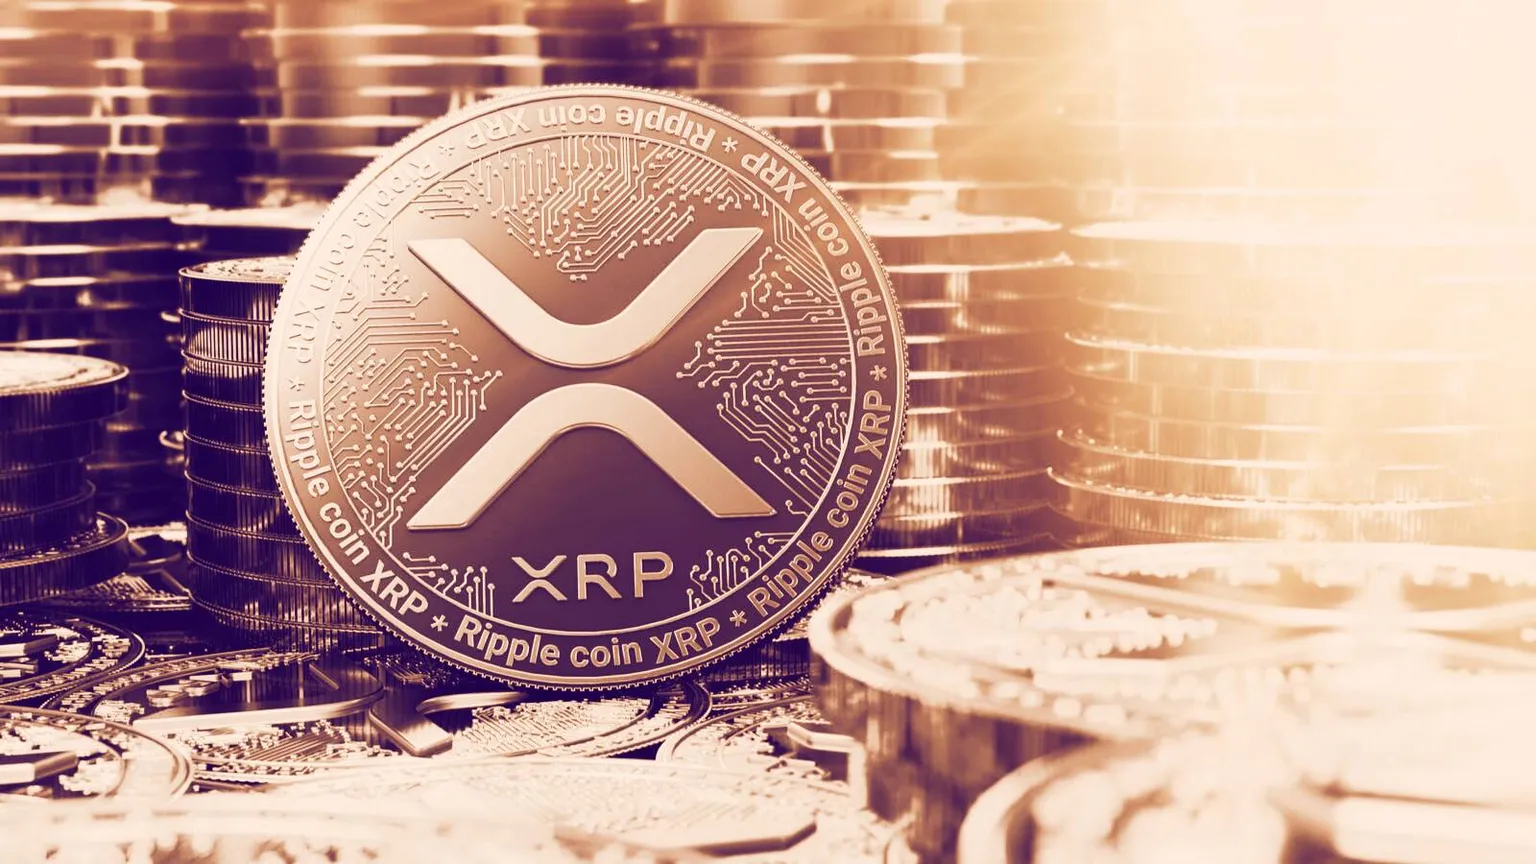 XRP is the third largest cryptocurrency by market cap. Image: Shutterstock